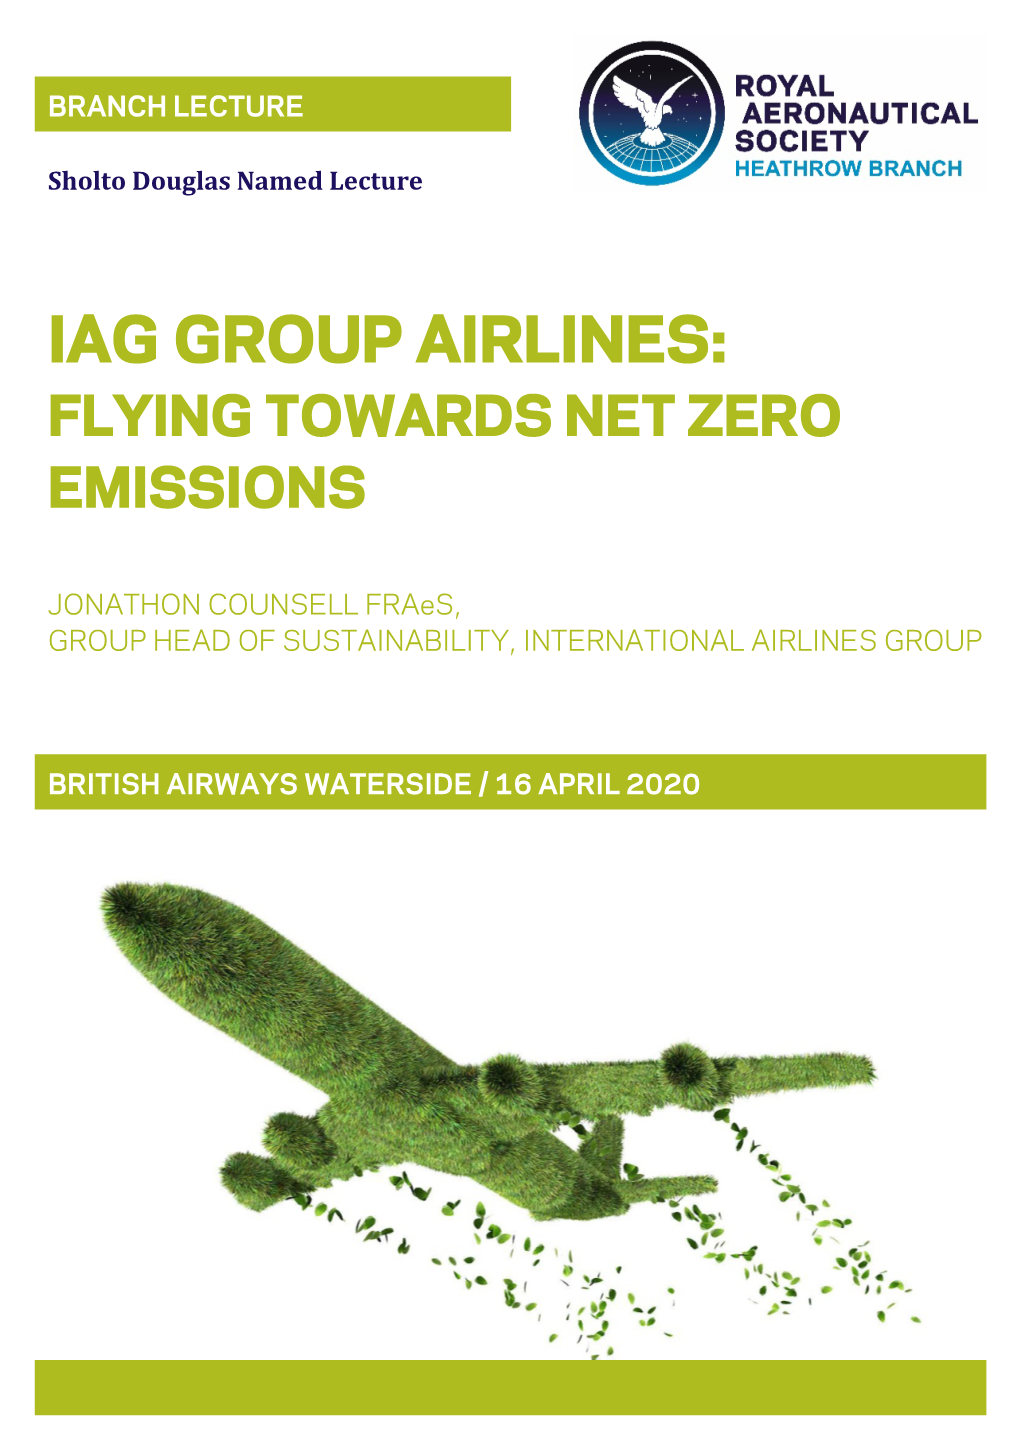 Iag Group Airlines: Flying Towards Net Zero Emissions